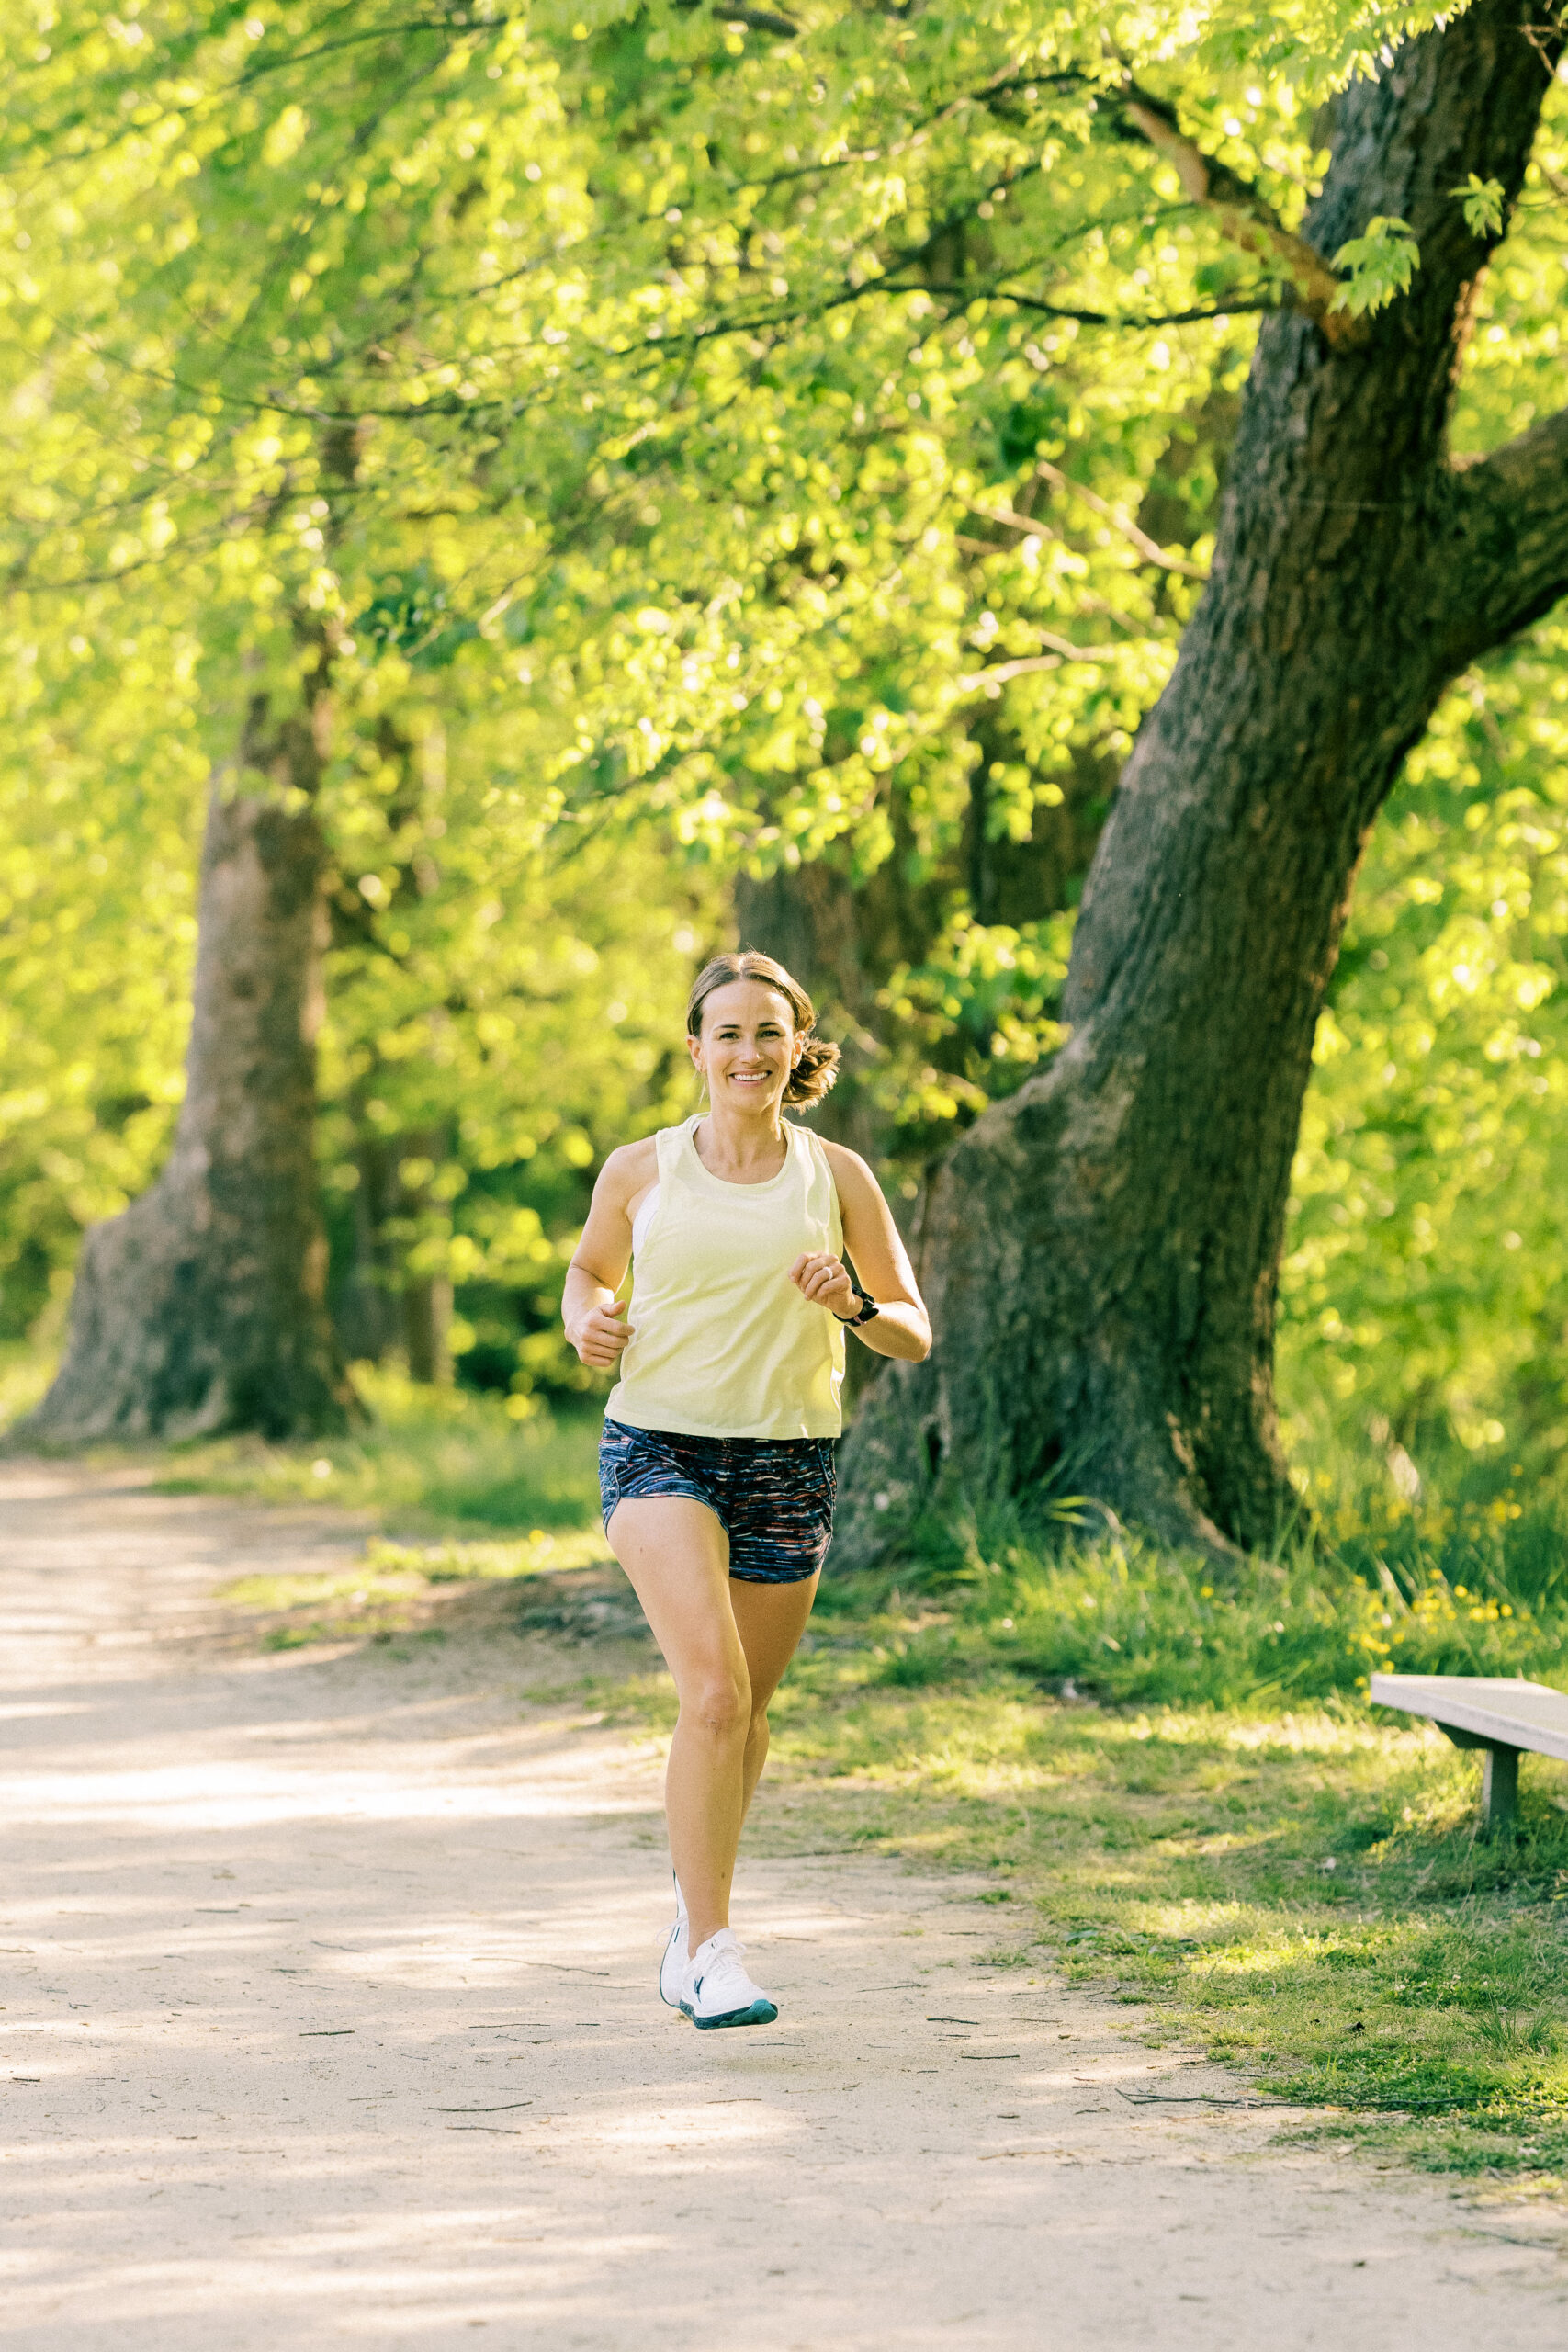 Why Running is the Best for Stress Relief